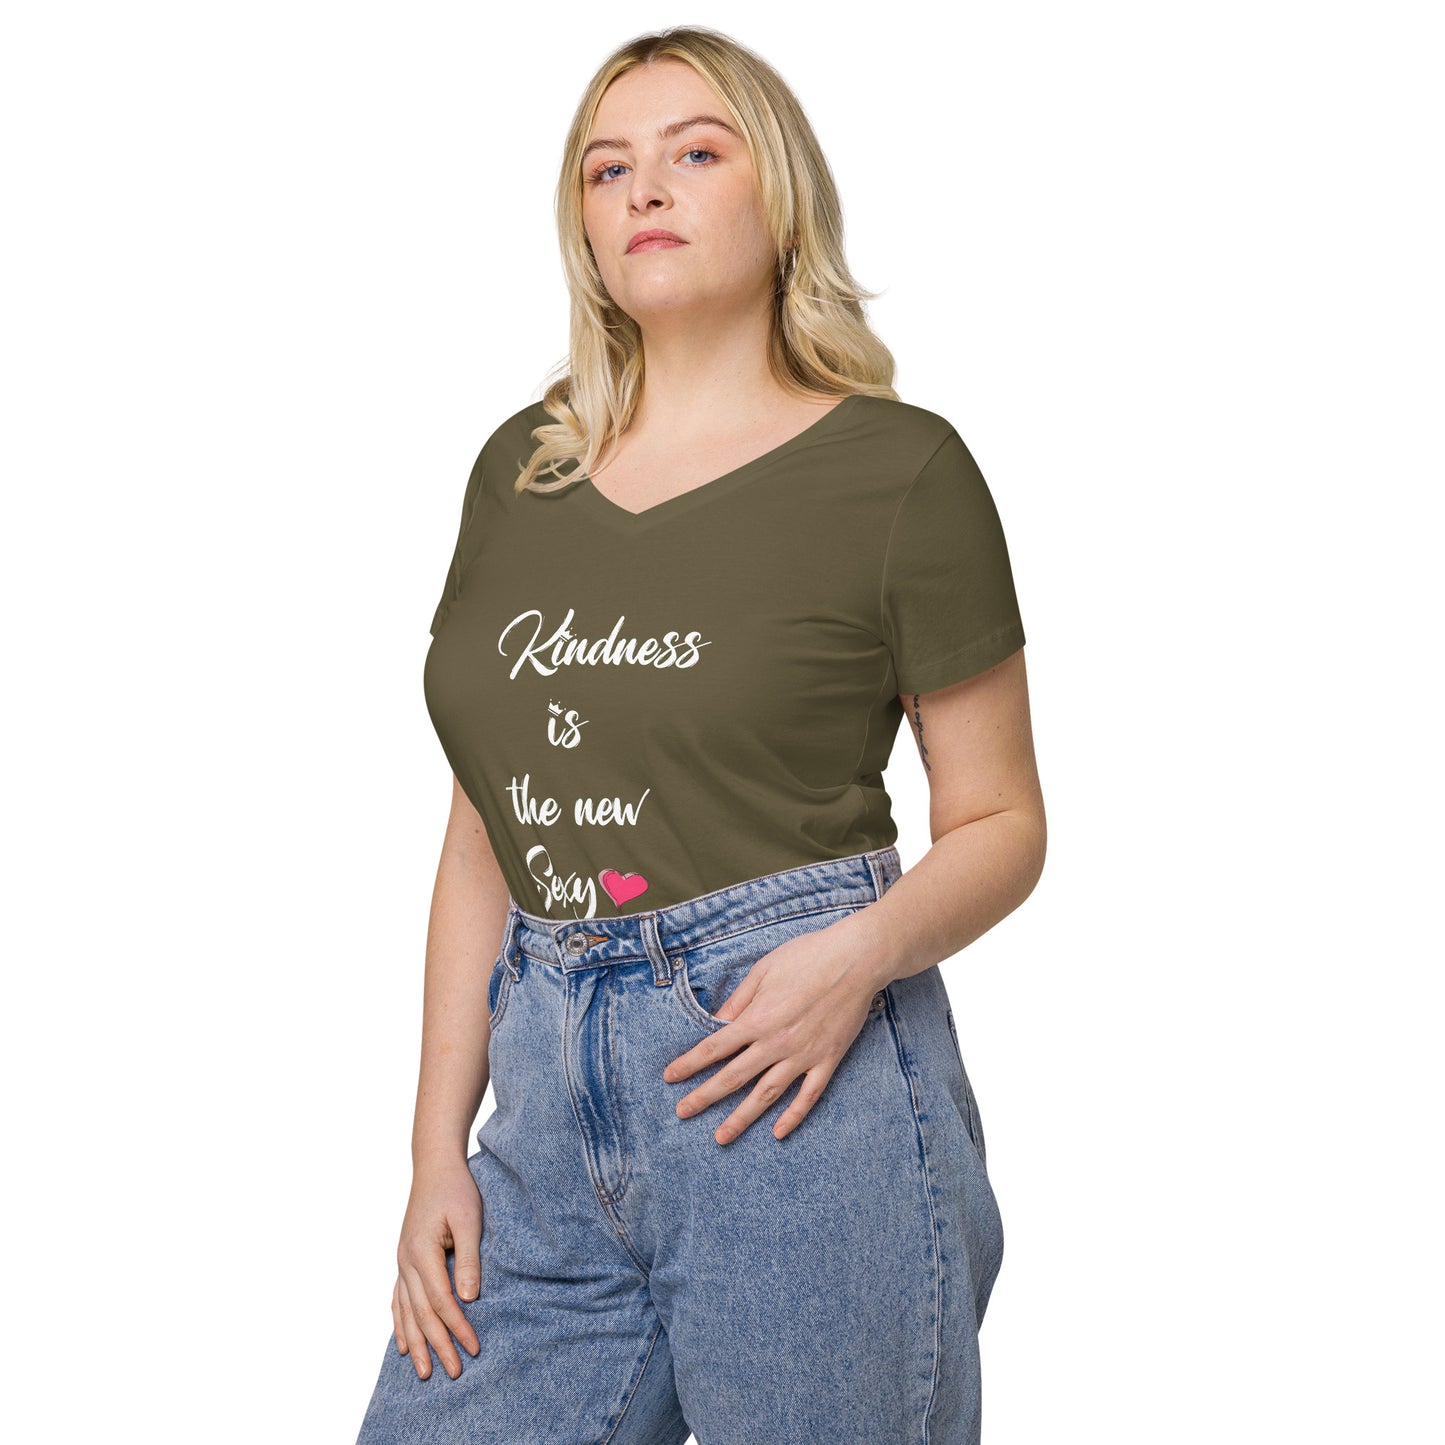 Kindness is the new Sexy v-neck t-shirt